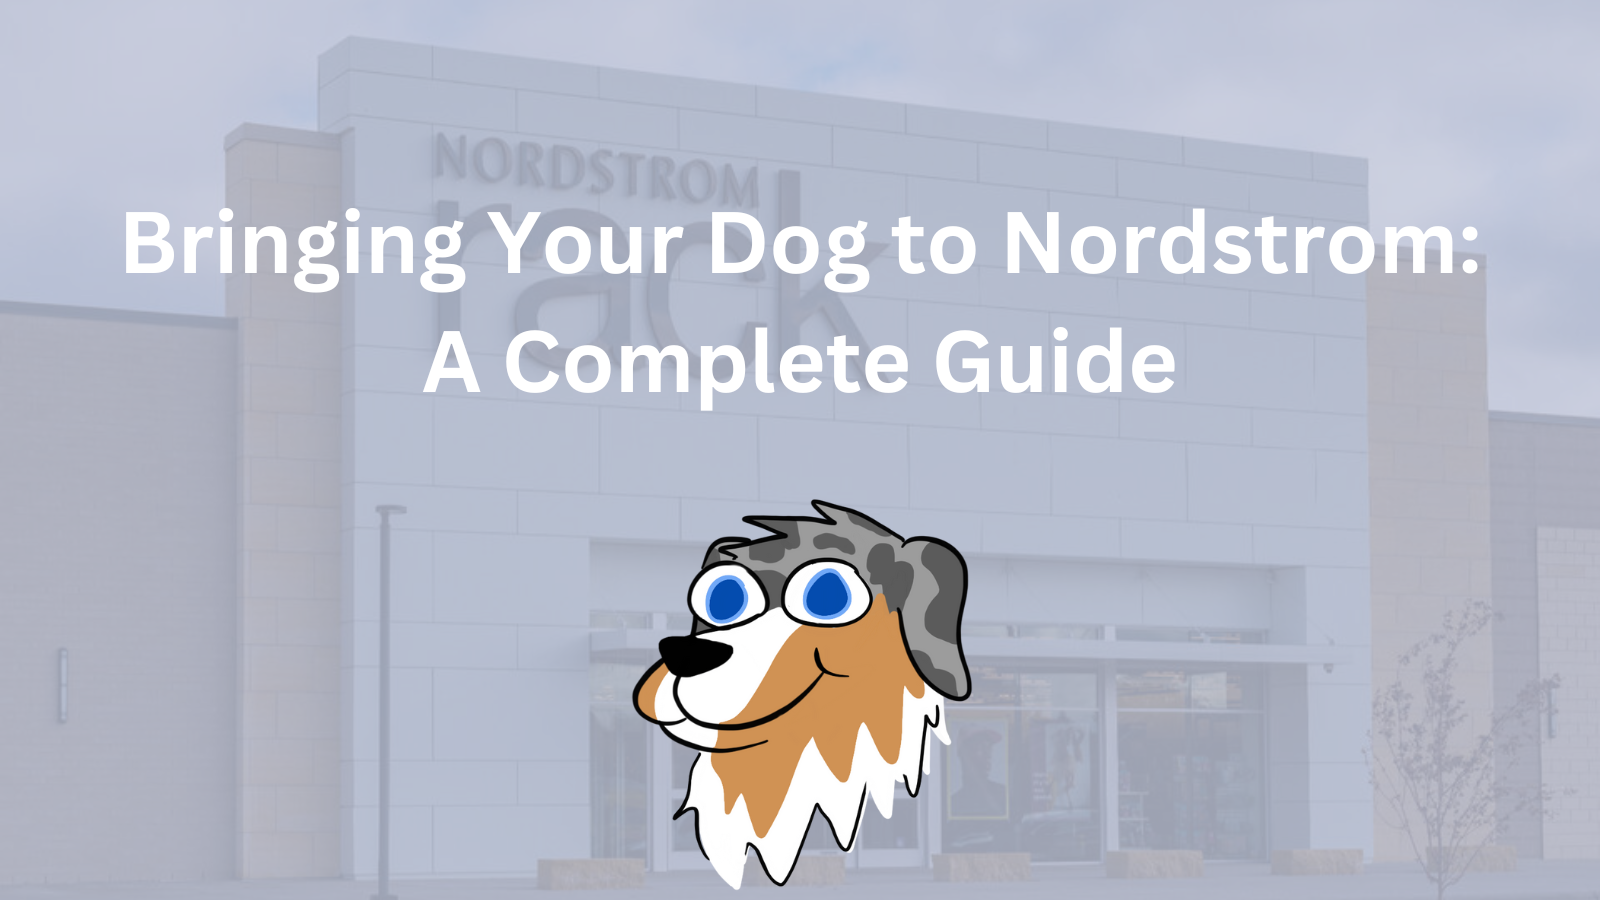 Image Text: "Bringing Your Dog to Nordstrom: A Complete Guide"